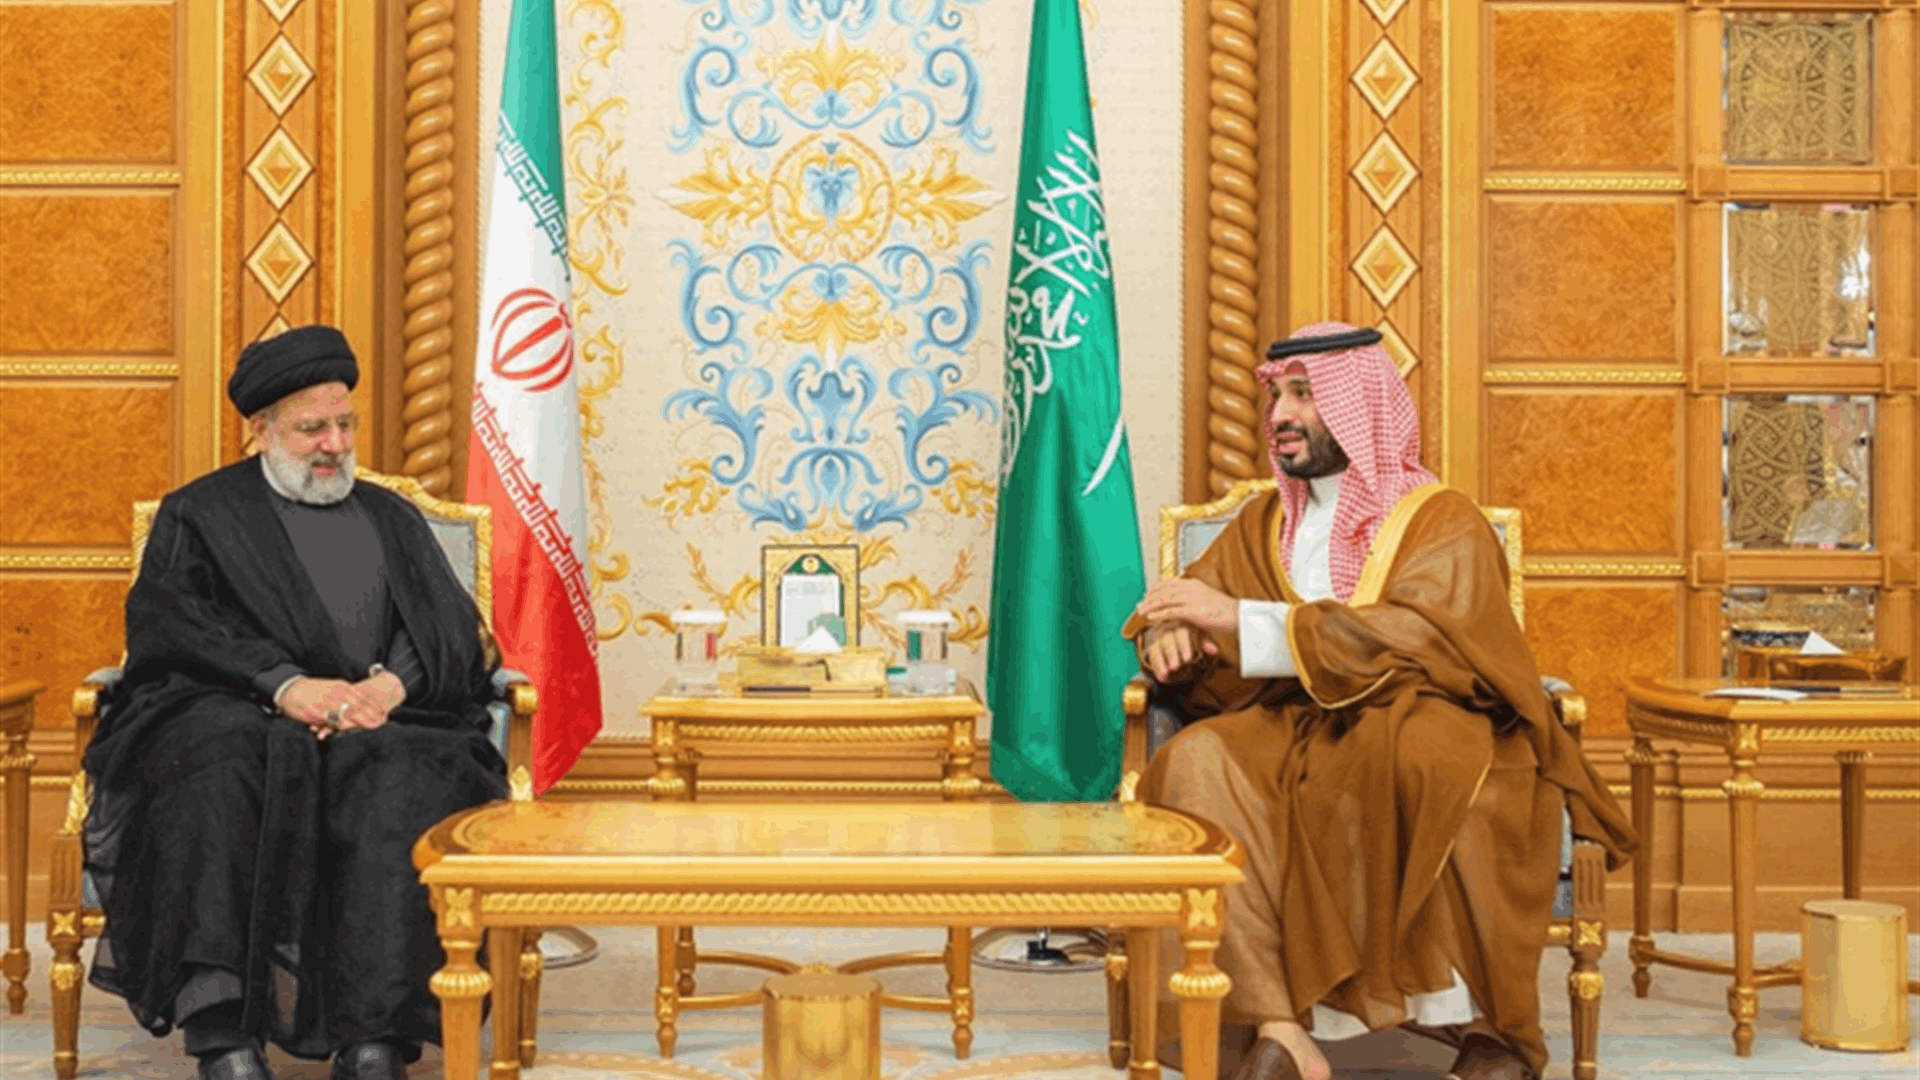 Saudi Crown Prince and Iranian President Meet for the First Time Since Rapprochement